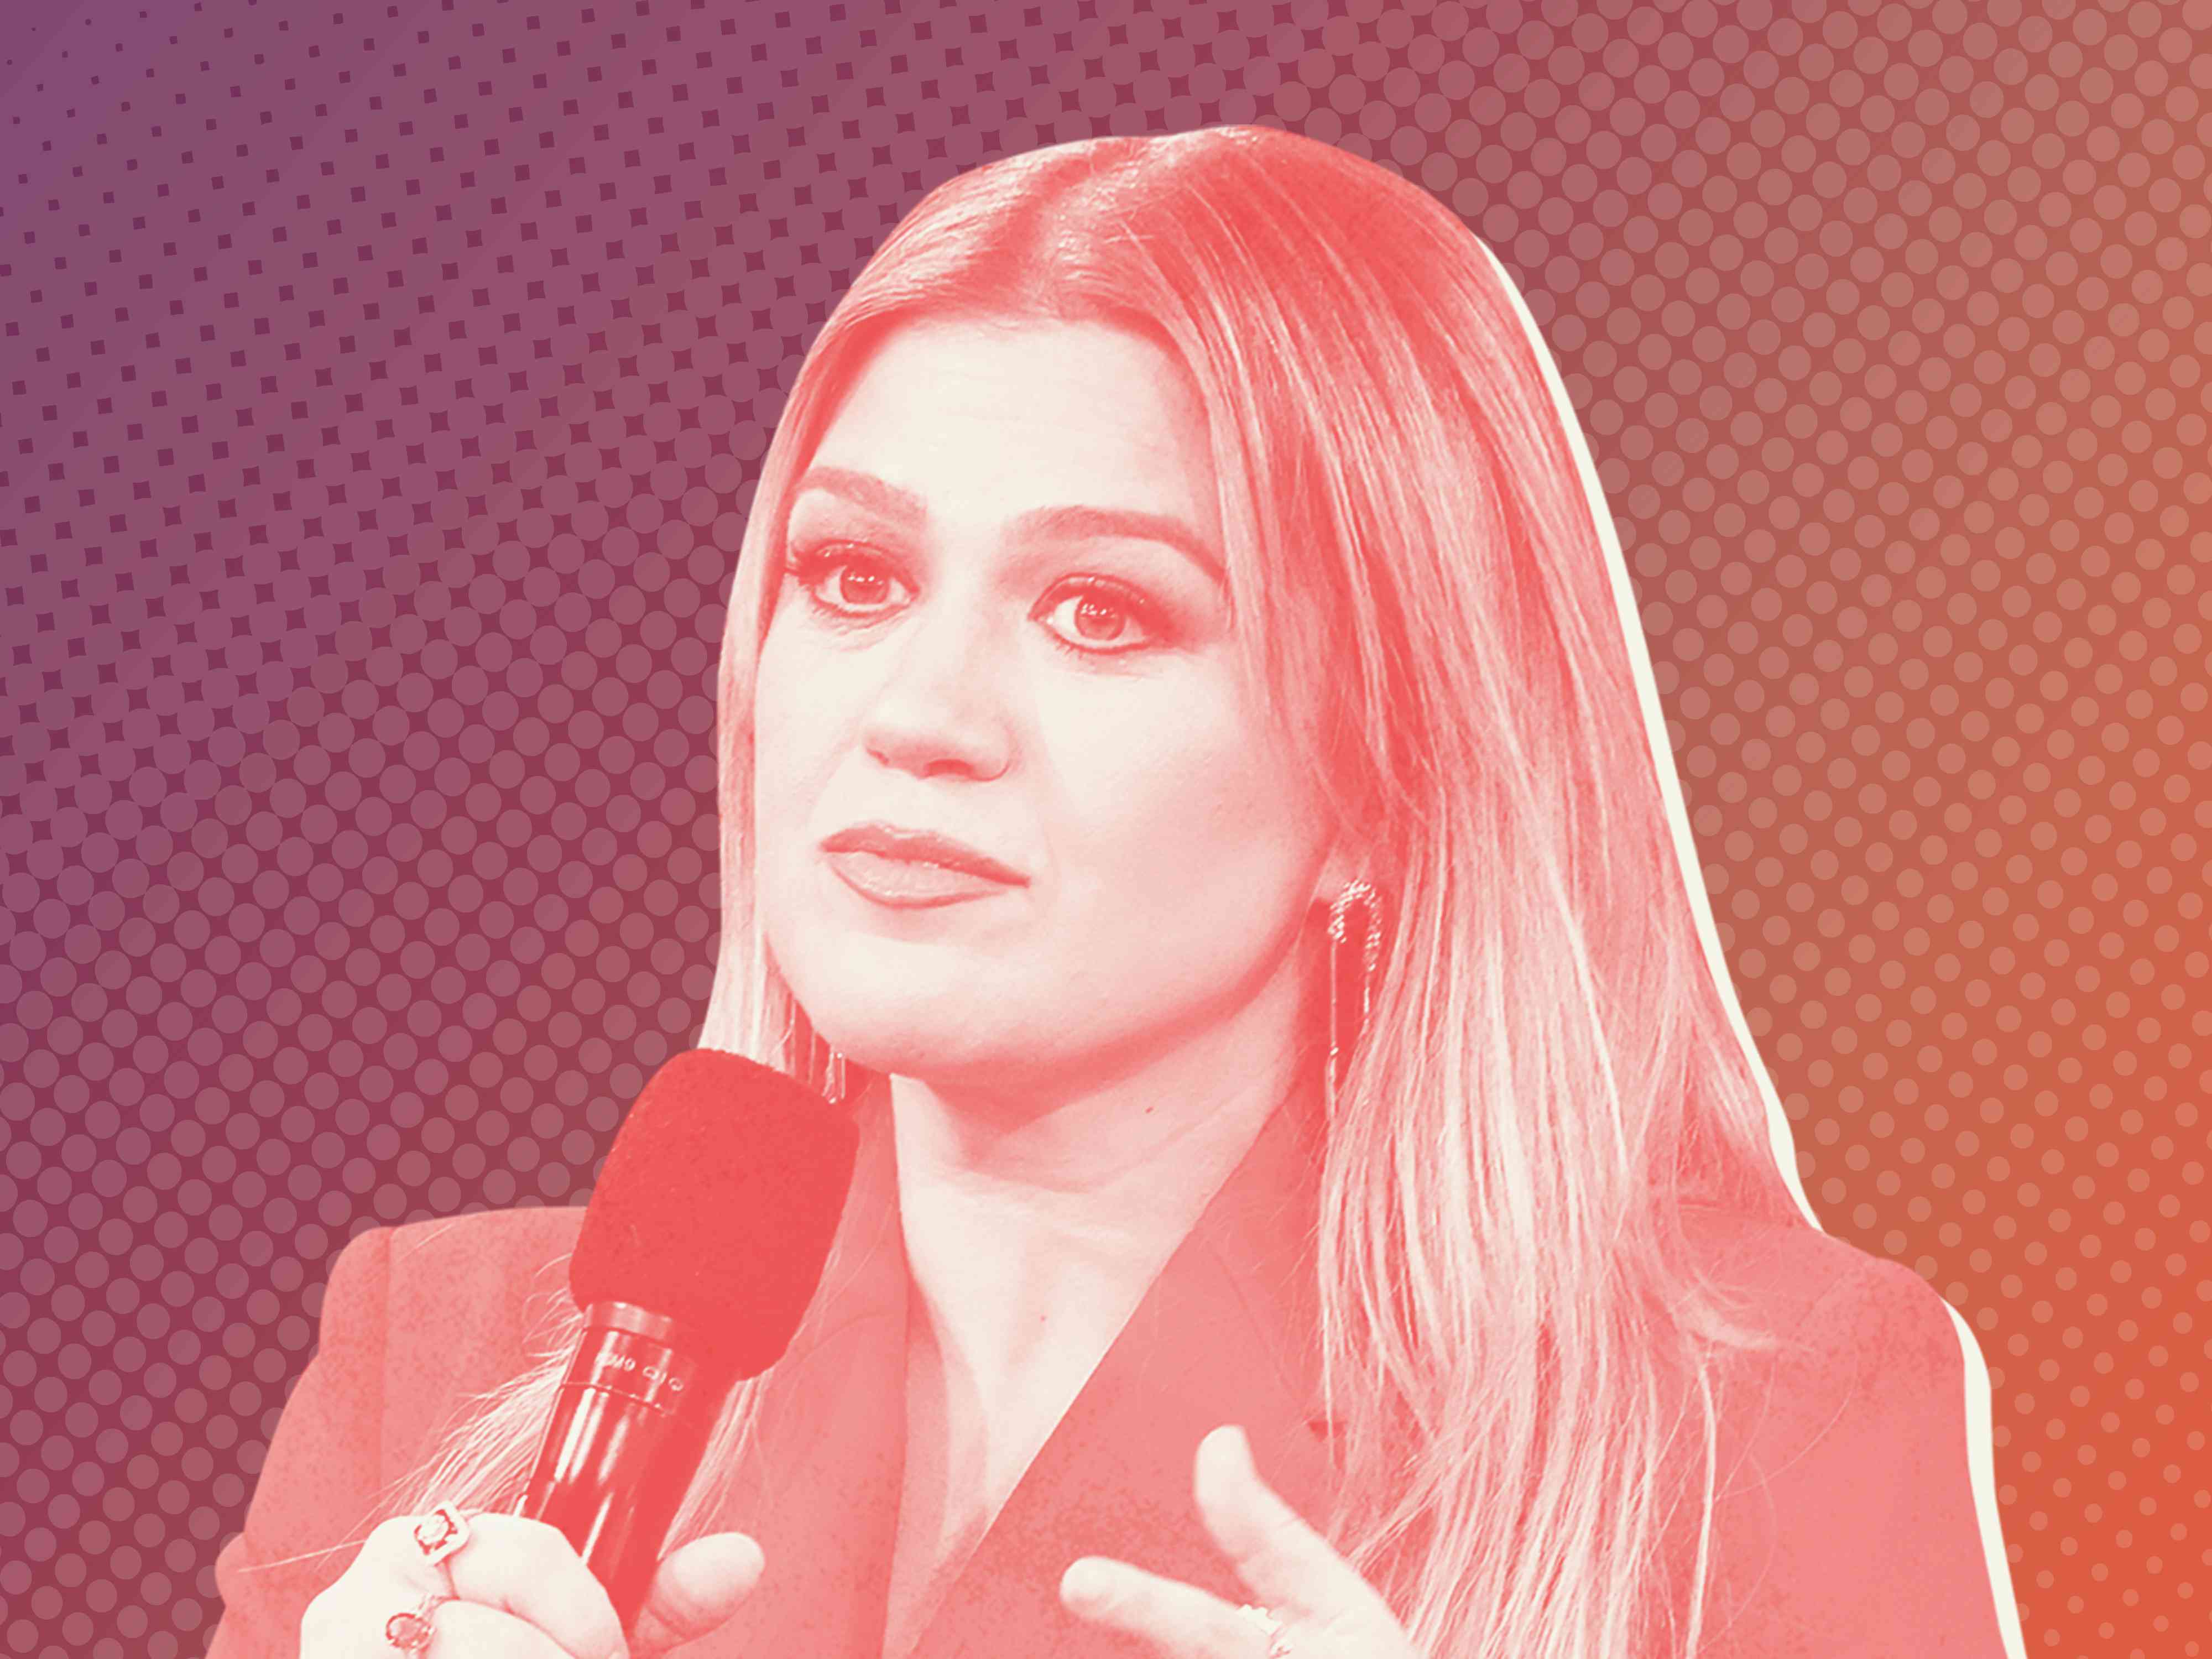 Kelly Clarkson Says This 3-Ingredient Dessert Is So Good She ‘Doesn’t Bother’ With Anything Else